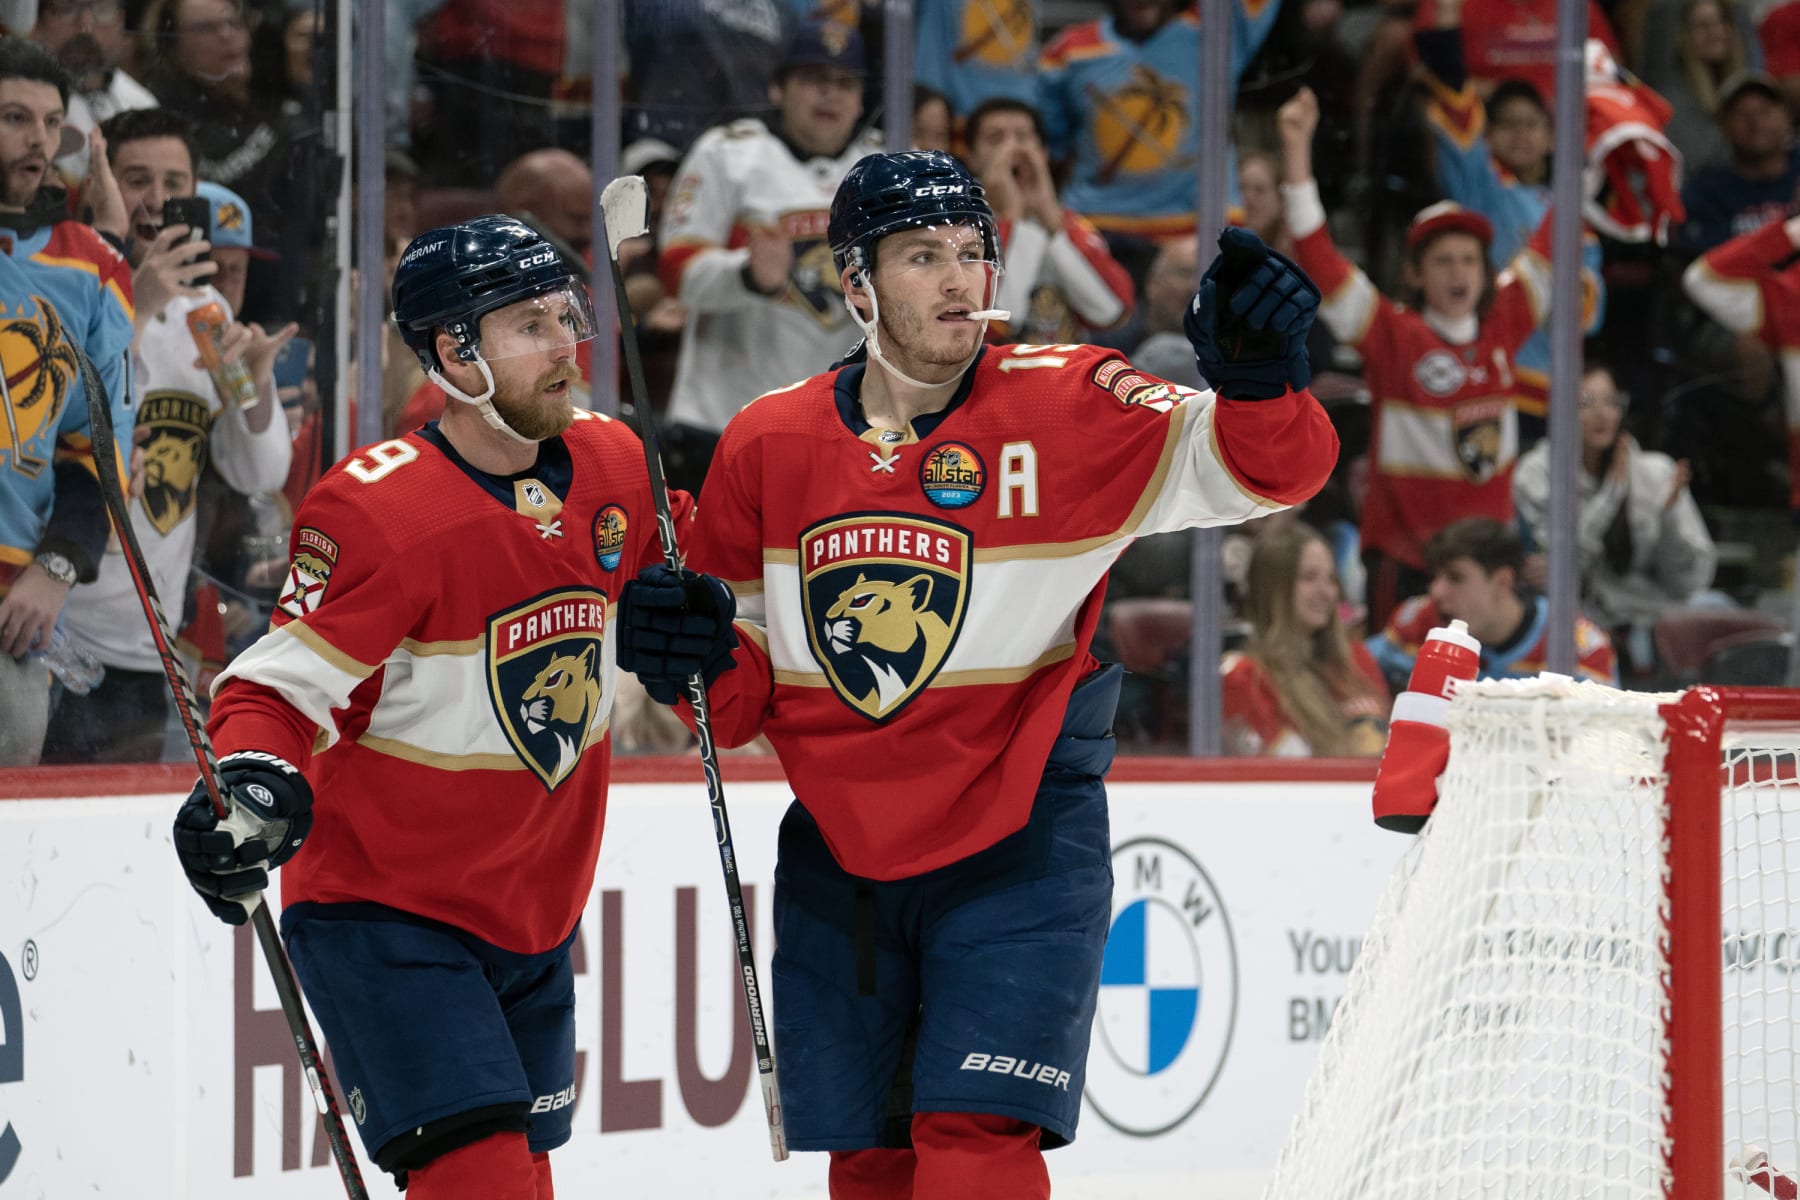 NHL fan misery rankings: No. 6 Florida Panthers - Sports Illustrated